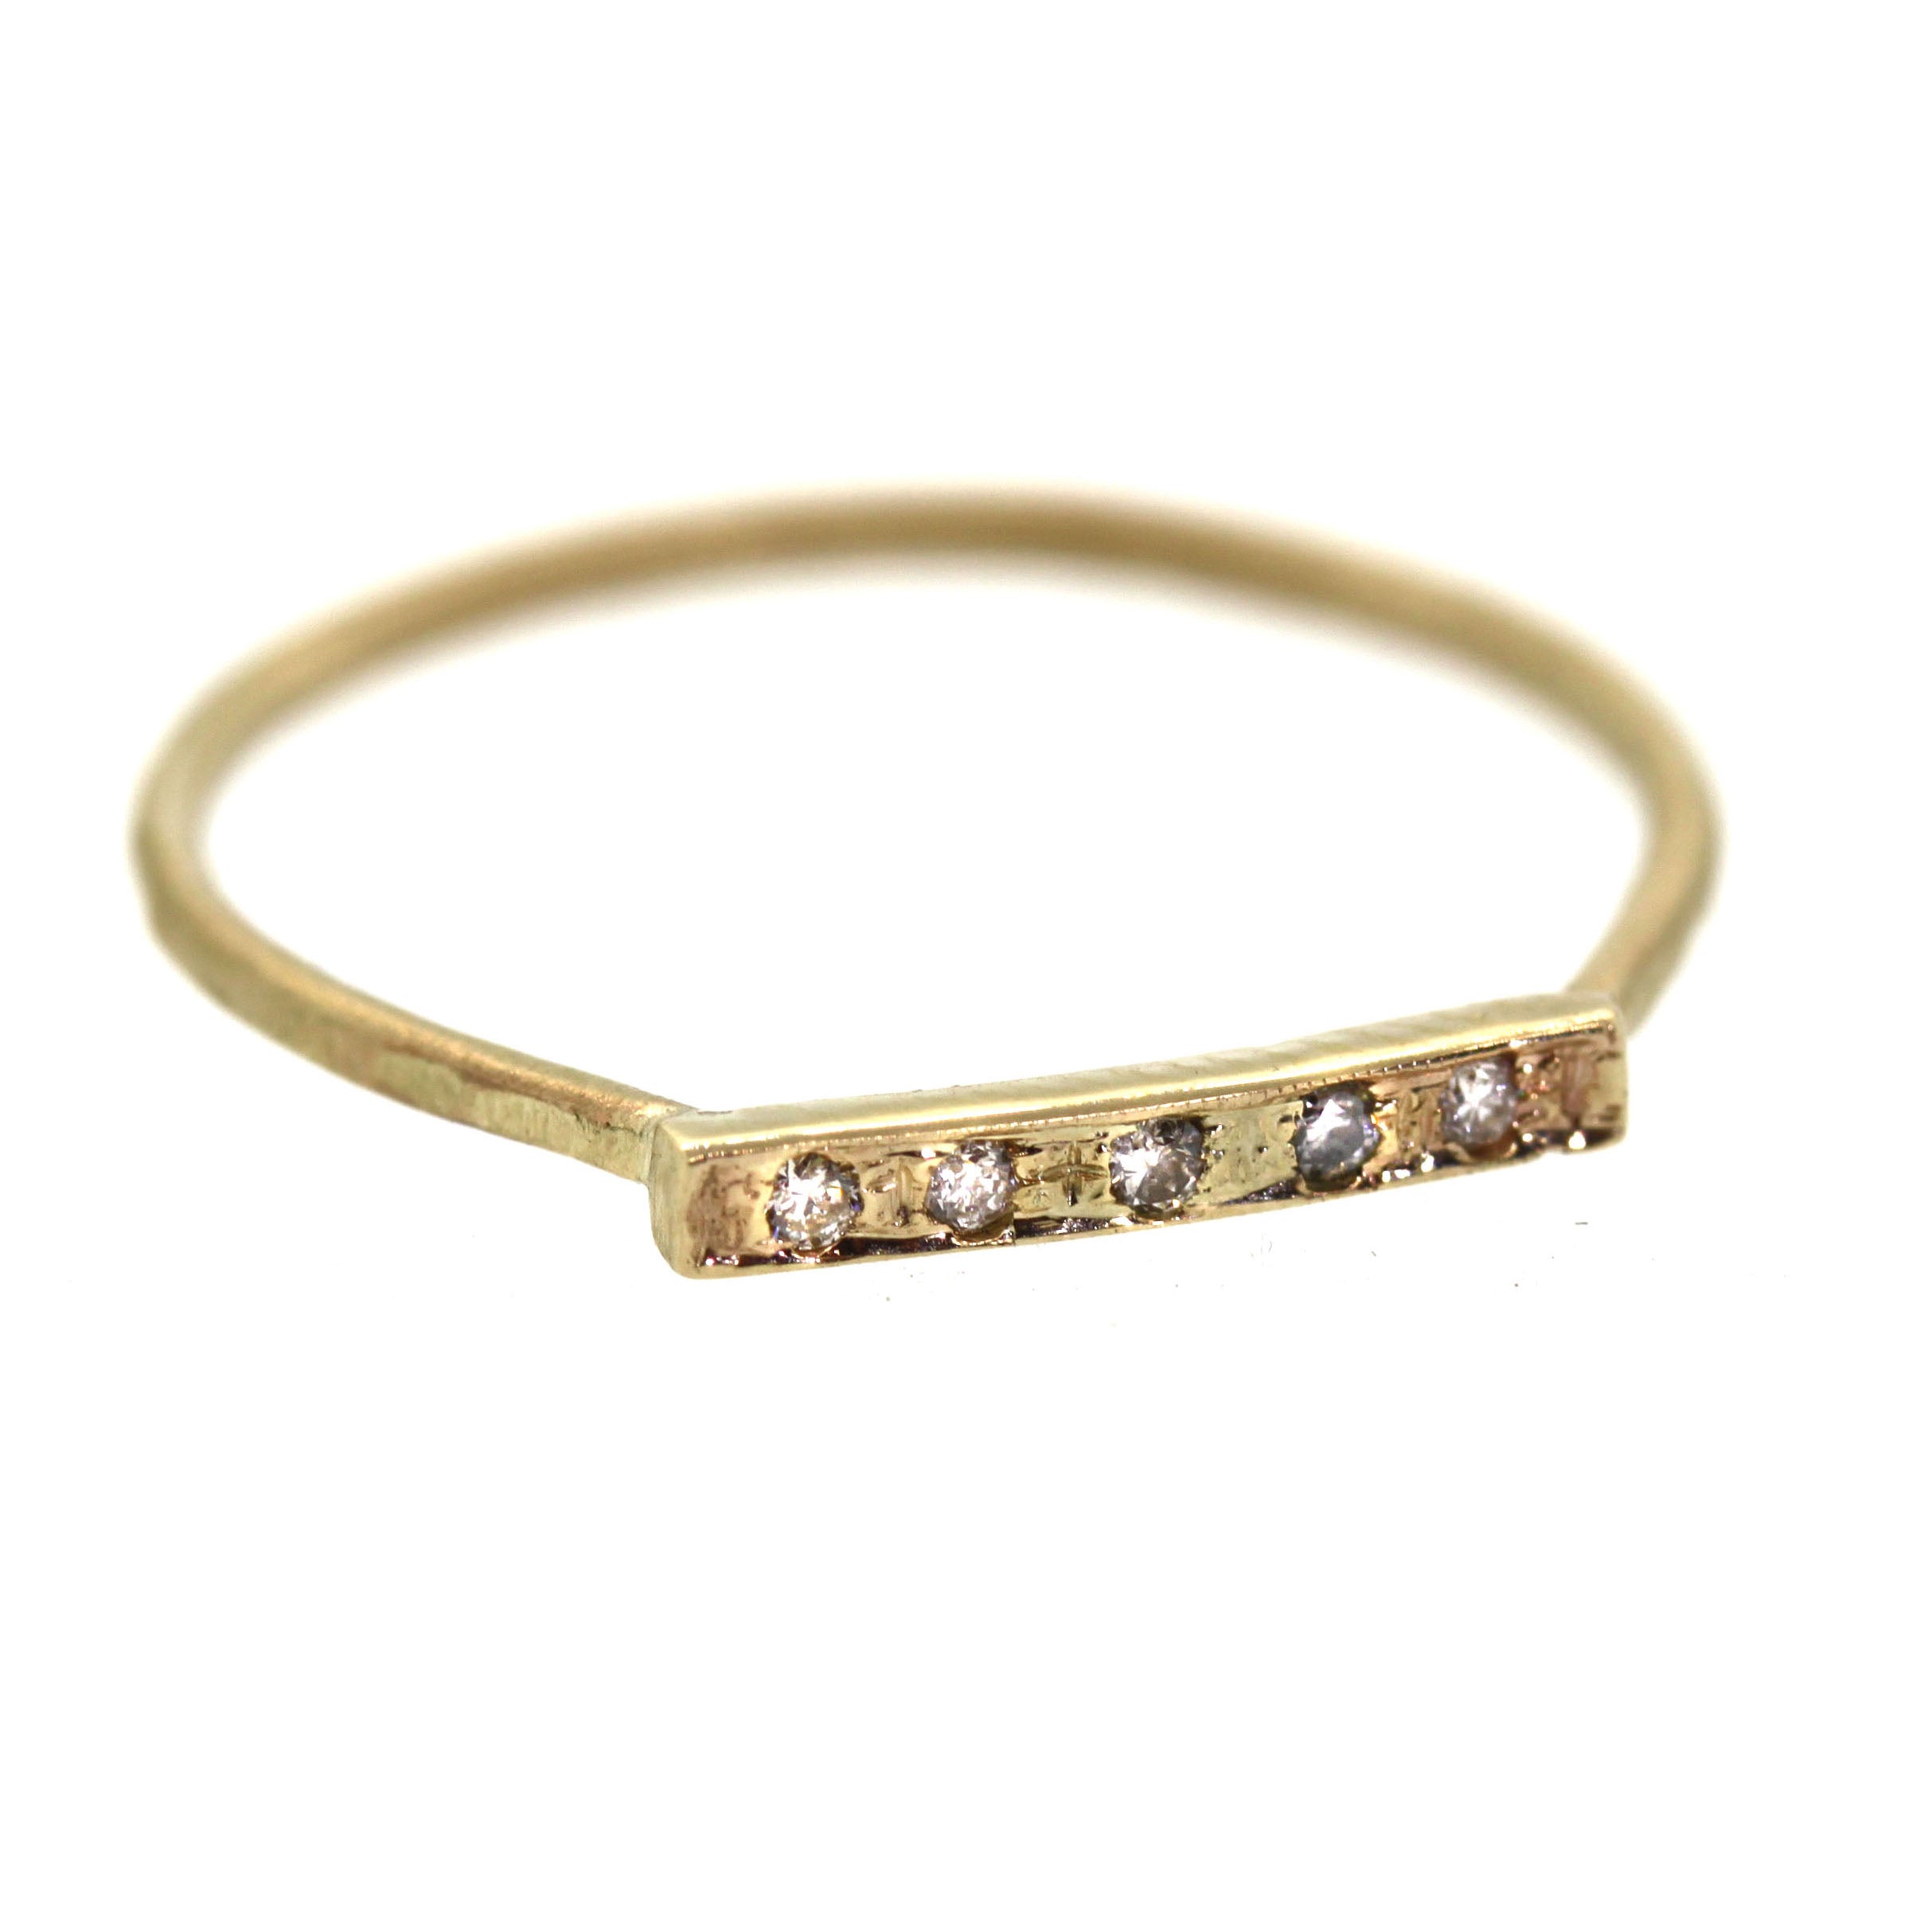 This Diamond Bar Ring features 5 shimmering diamonds pave set into a bar across a yellow gold band. It was handcrafted at Rebecca Lankford Designs in Houston, Texas.